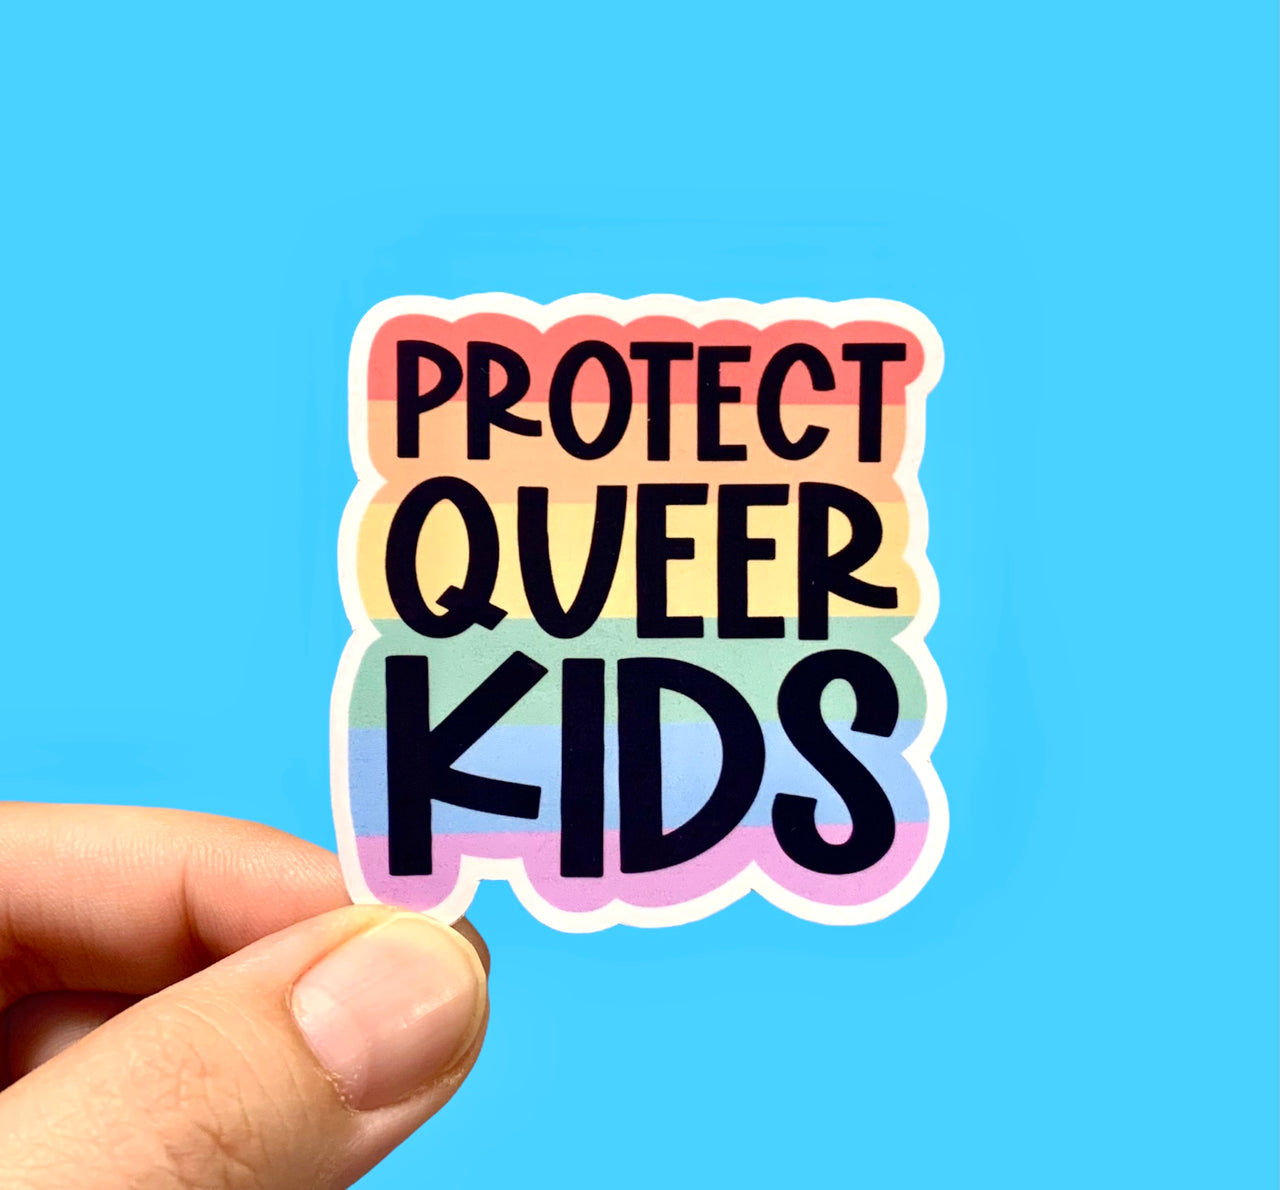 Protect queer kids (pack of 3 or 5 stickers)